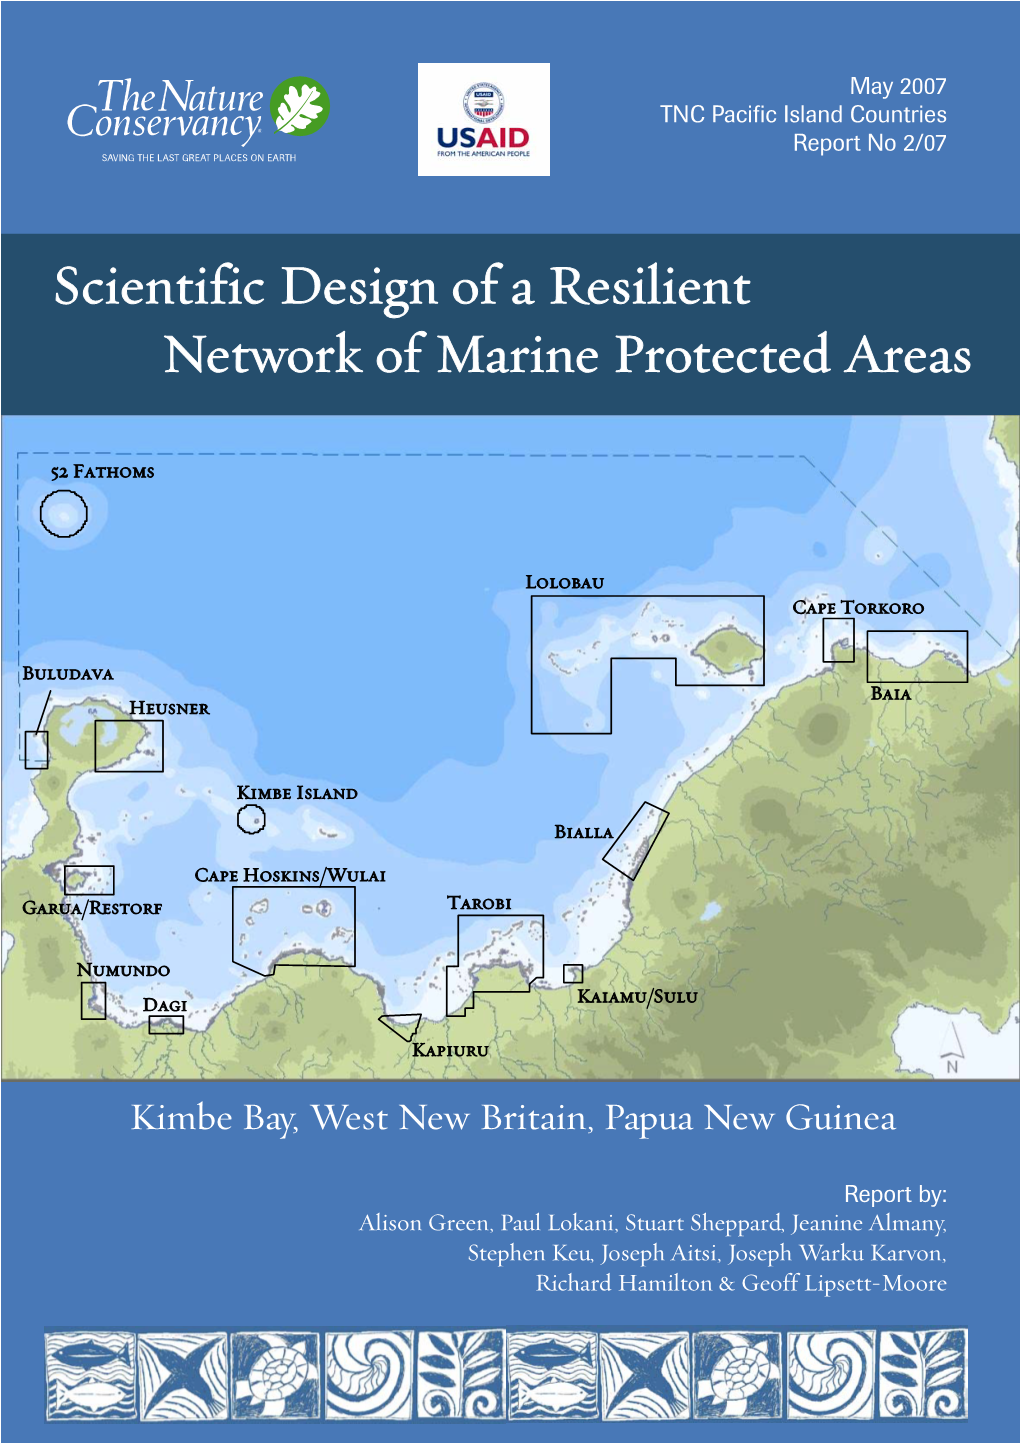 Kimbe Bay Marine Protected Area Network, Aims to Provide Stakeholders with an In-Depth Report of the Work Carried out by the Nature Conservancy to Date